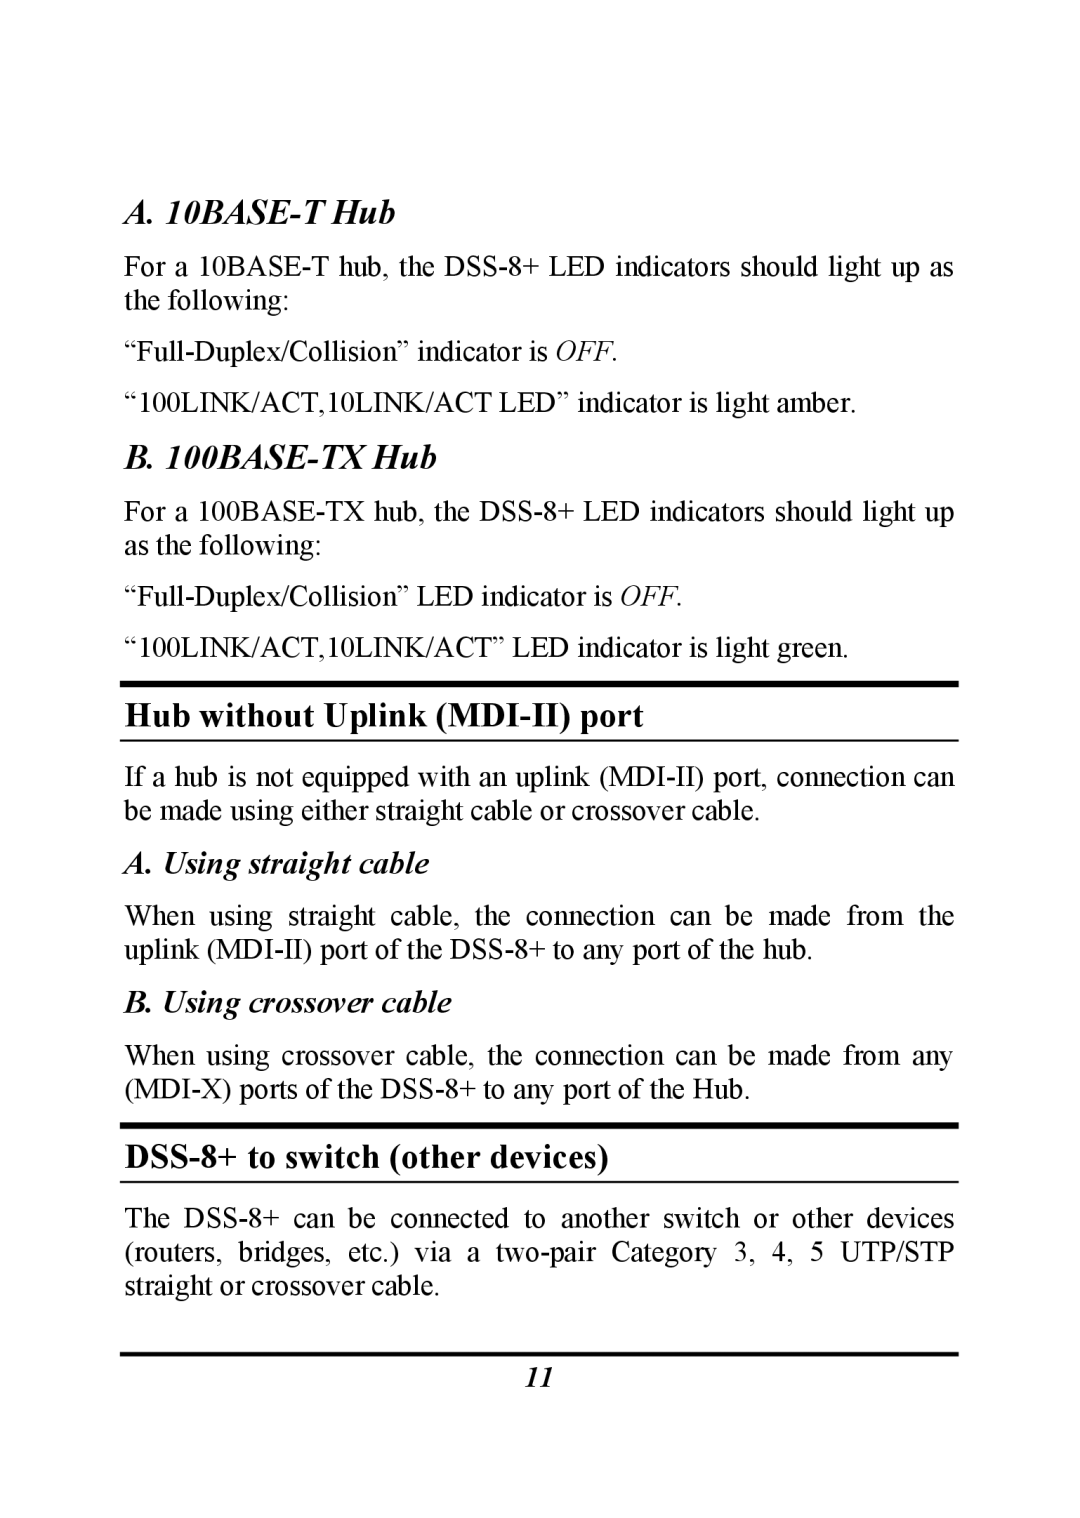 D-Link manual Hub without Uplink MDI-II port, DSS-8+ to switch other devices 